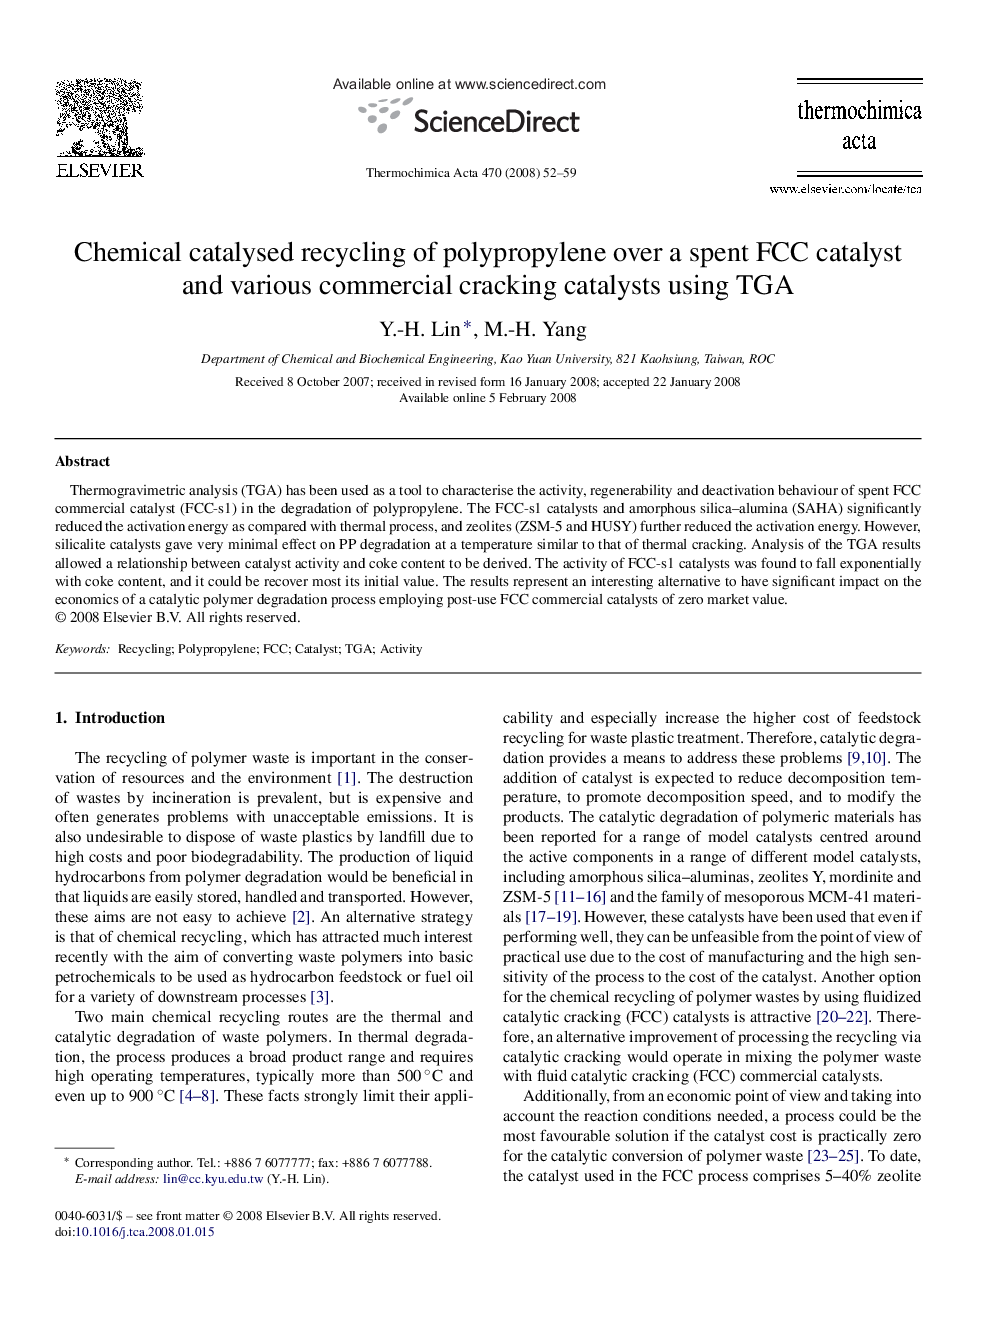 Chemical catalysed recycling of polypropylene over a spent FCC catalyst and various commercial cracking catalysts using TGA